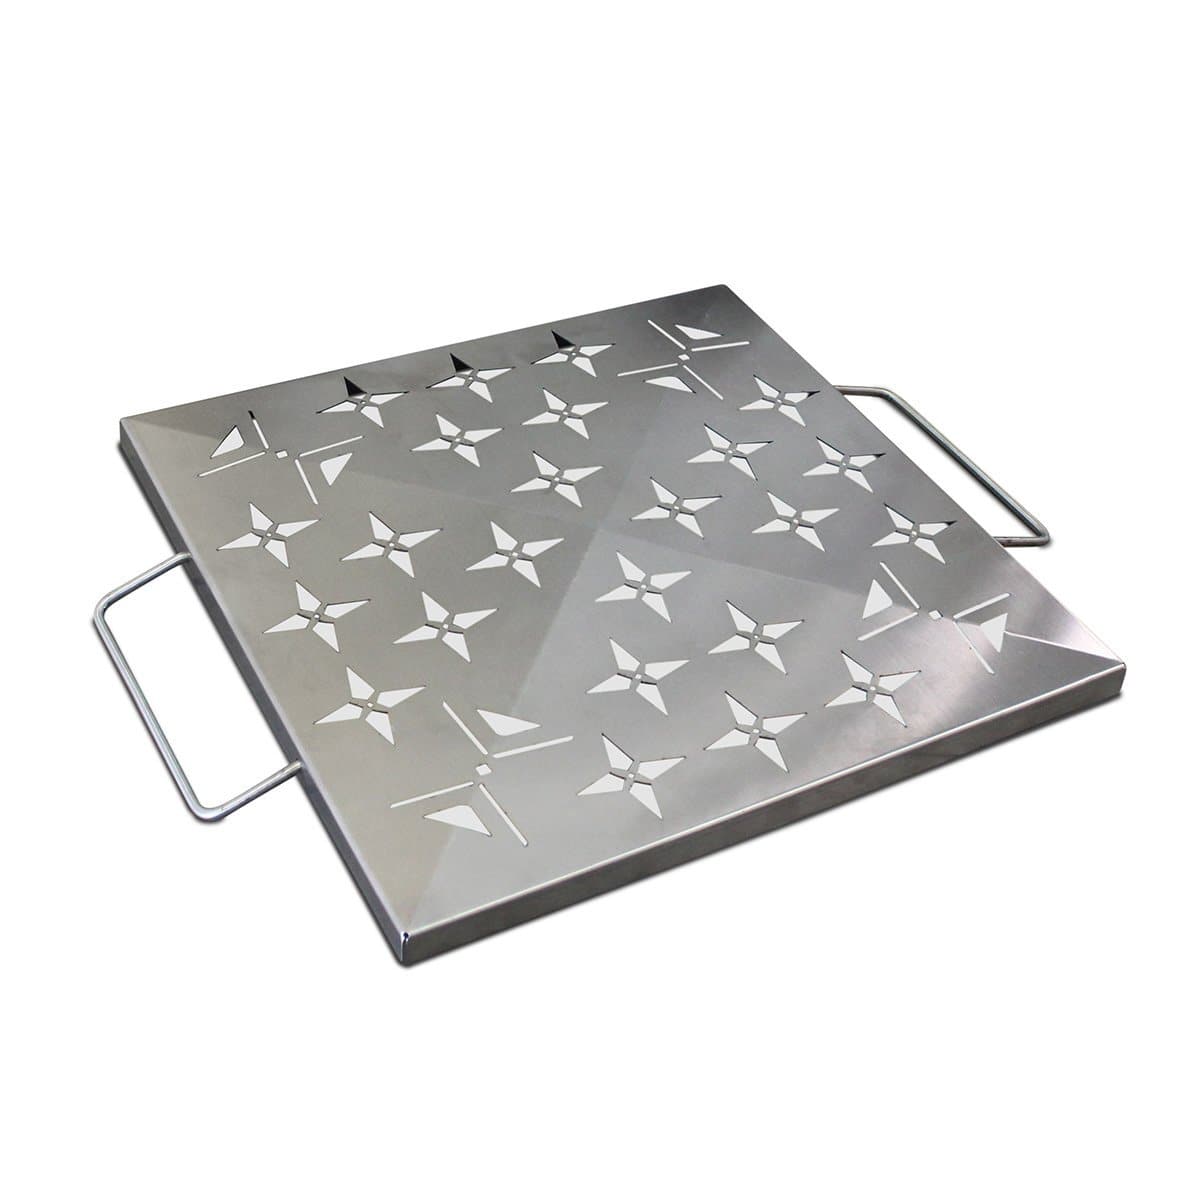 Blue Sky Stainless Steel Outdoor Burn Cage - Senior.com Burn Cages